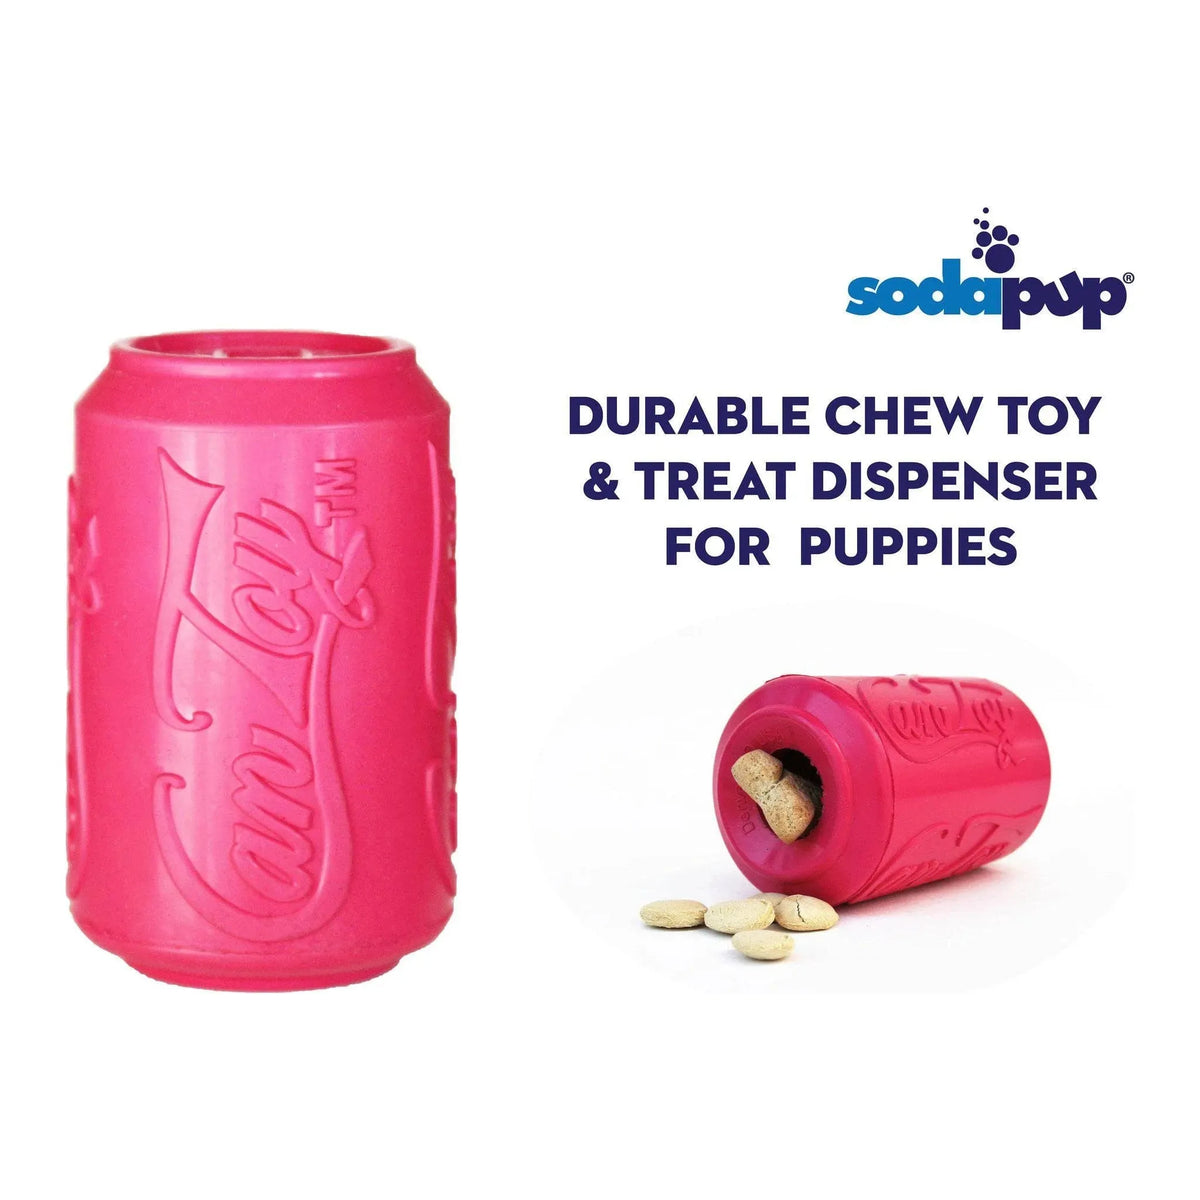 SodaPup/True Dogs, LLC Puppy Can Toy Durable Rubber Chew Toy &amp; Treat Dispenser For Teething Pups by SodaPup/True Dogs, LLC